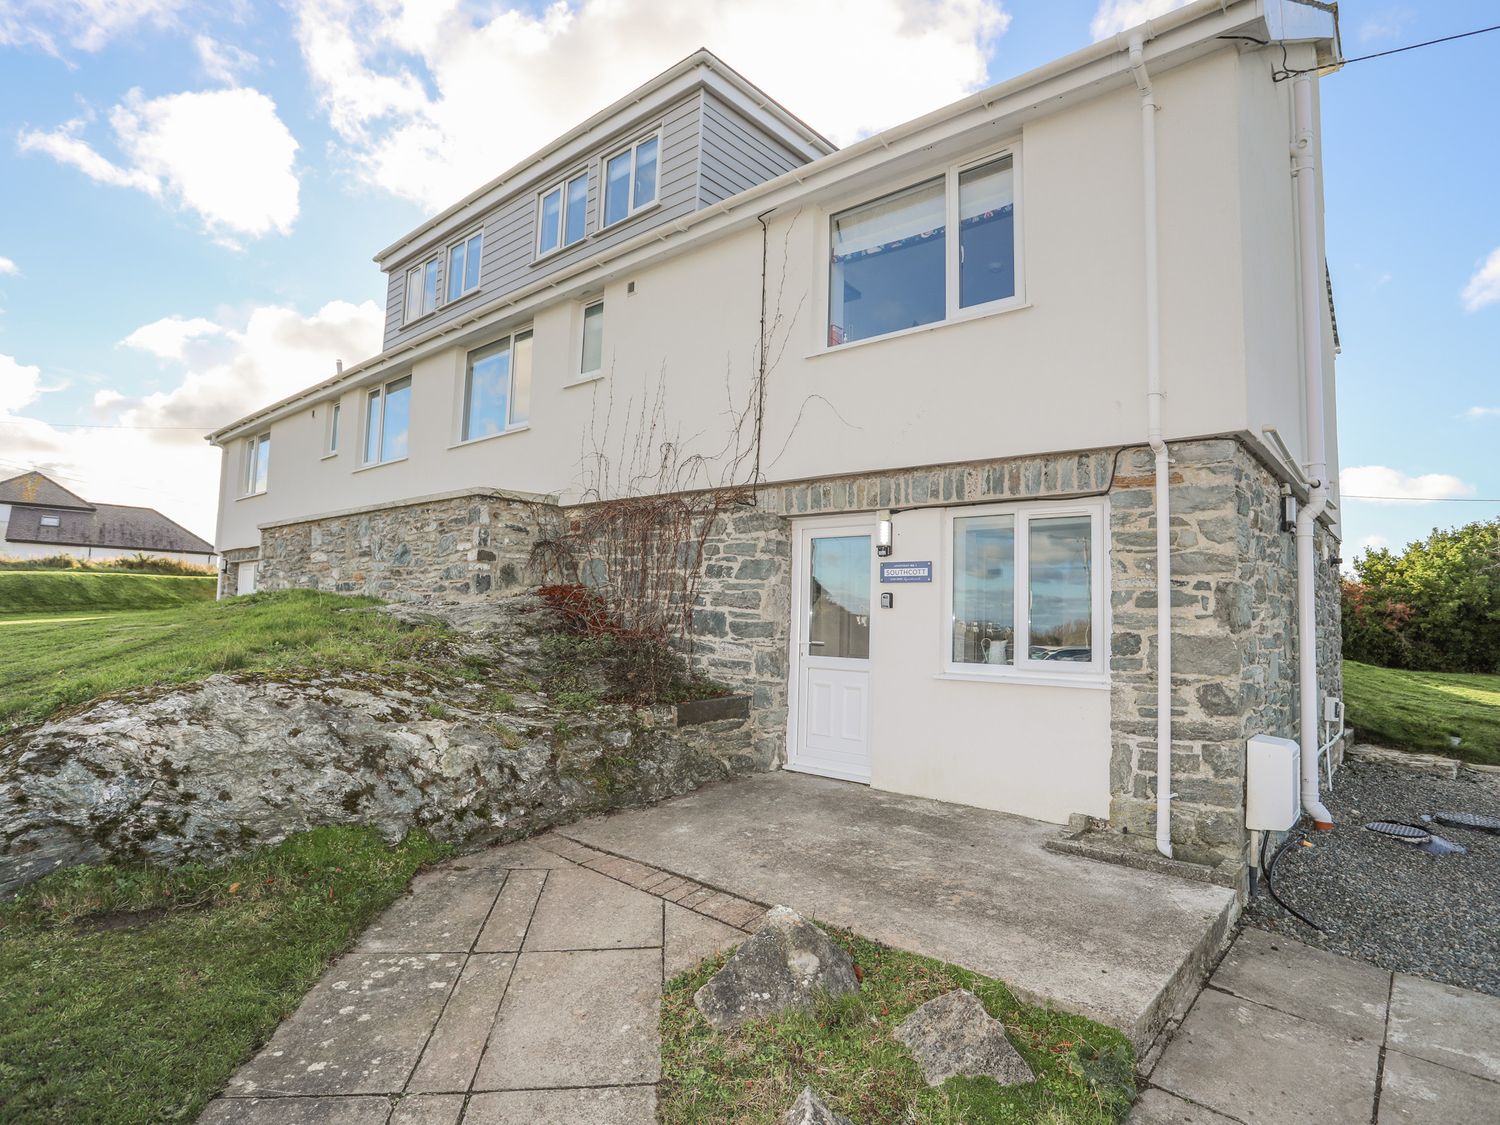 Southcott Apartment - Anglesey - 1016556 - photo 1